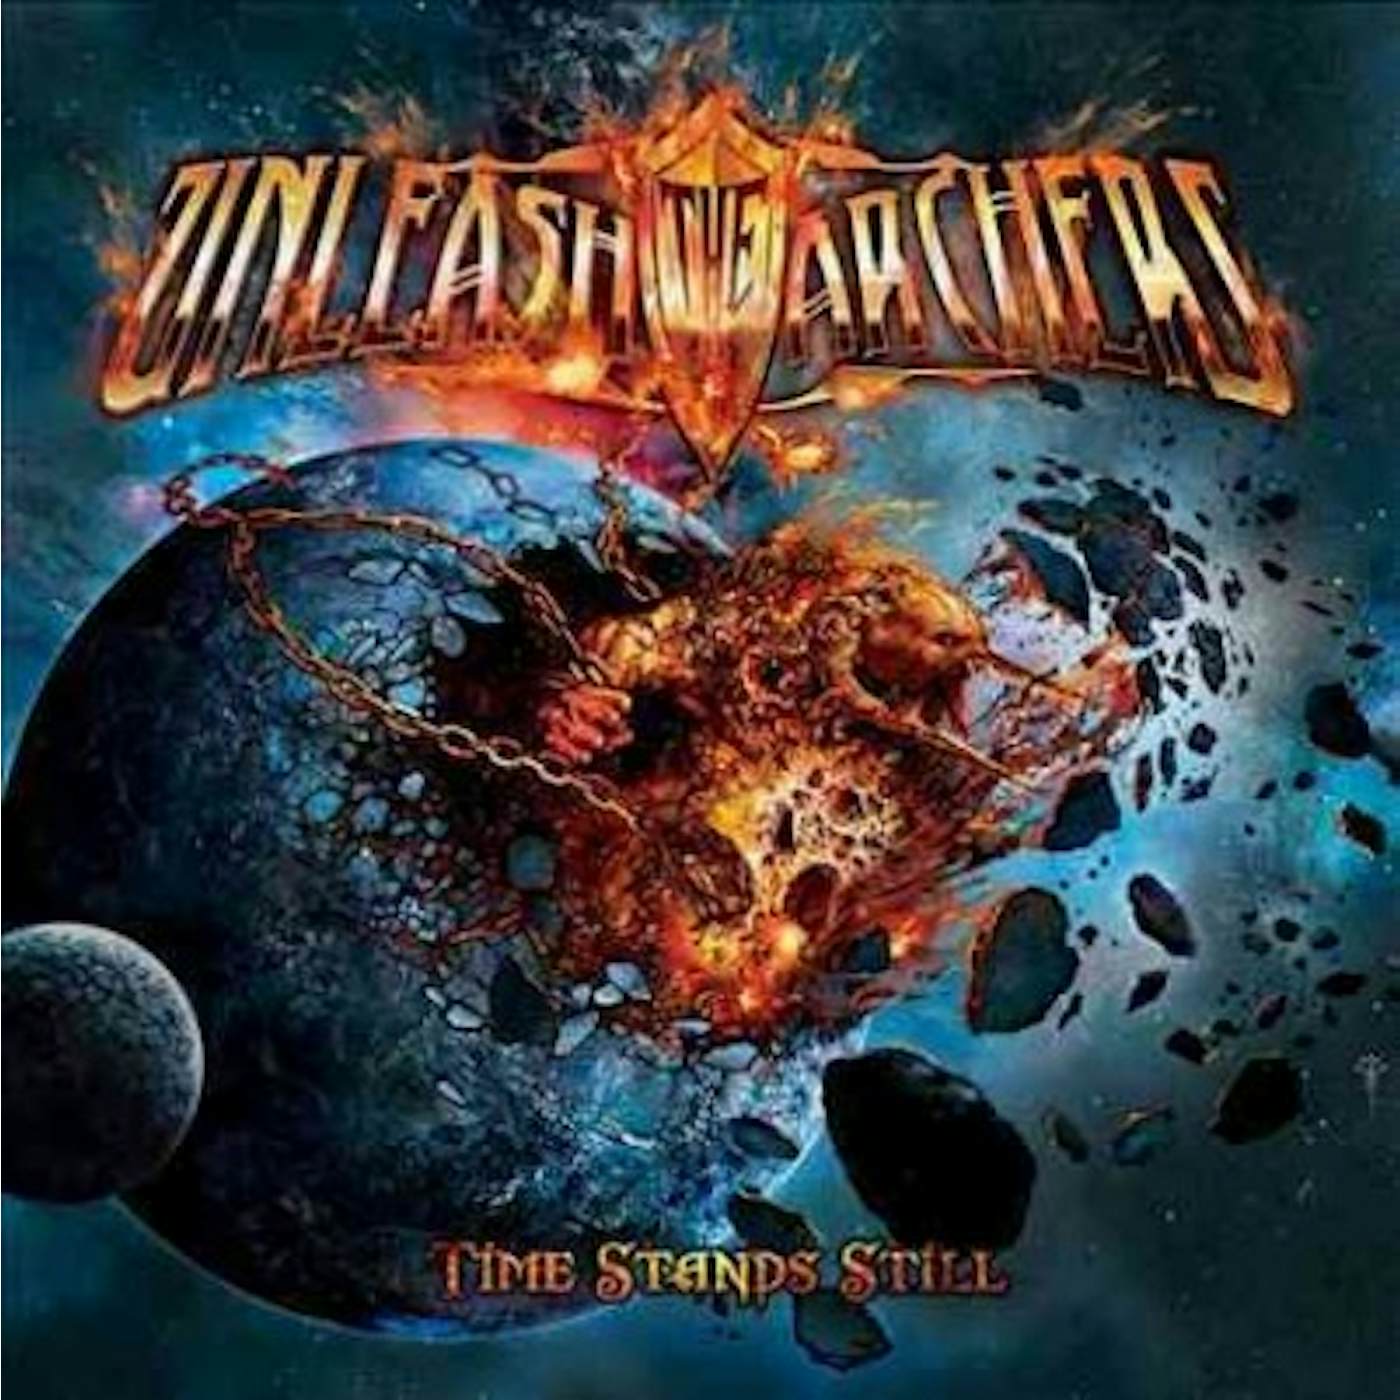 Unleash The Archers TIME STANDS STILL CD